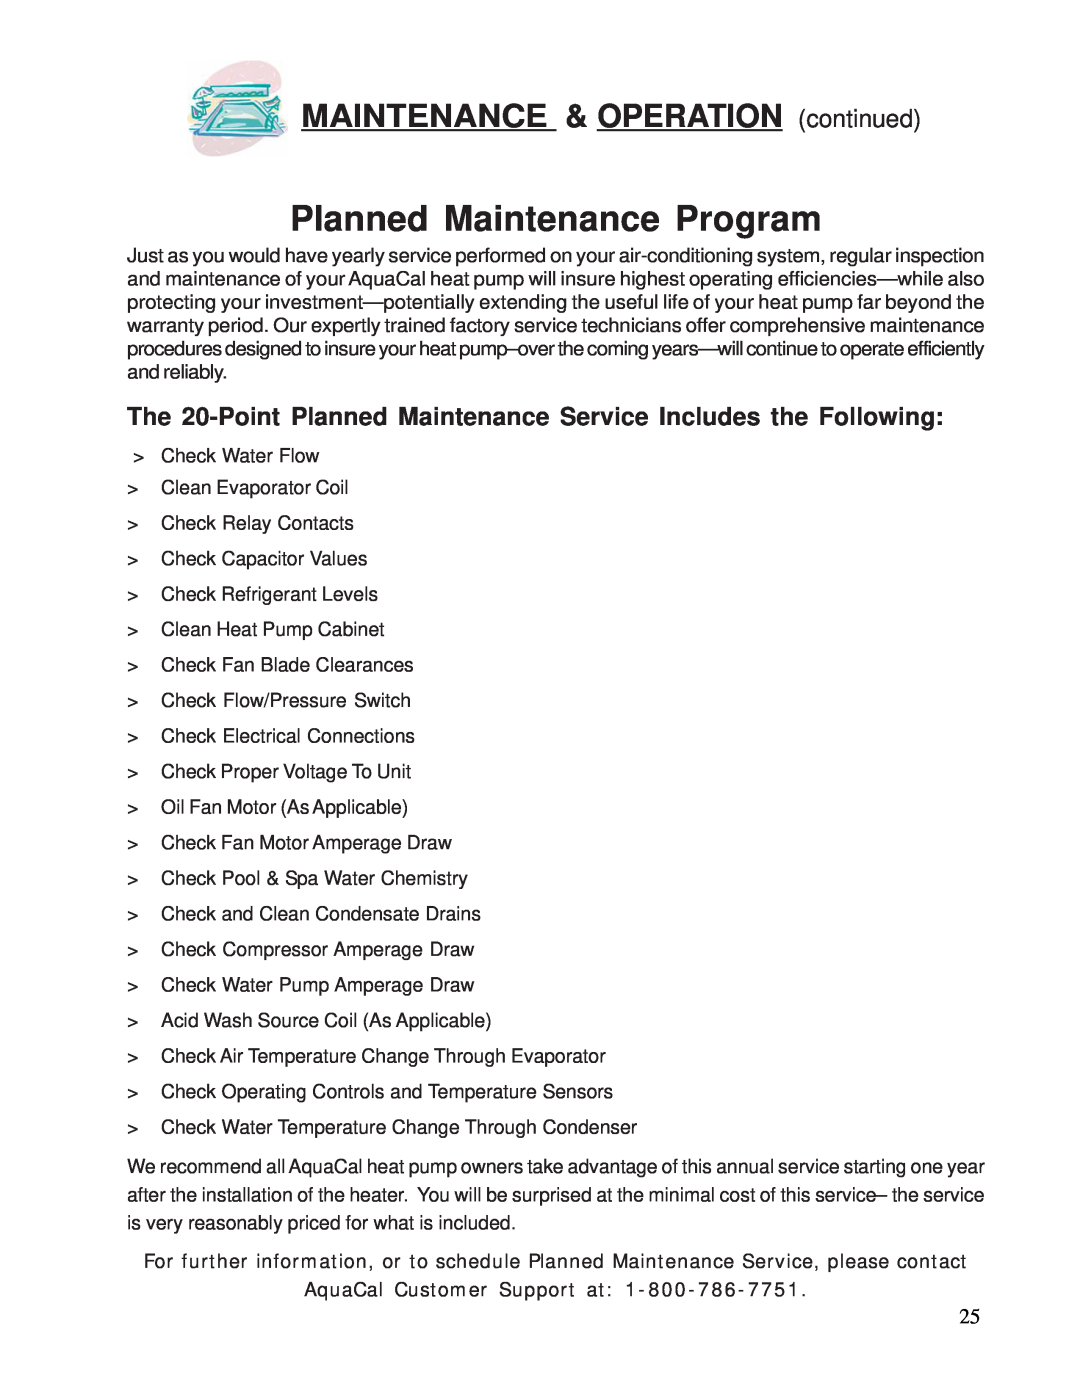 Aquacal 100 owner manual Planned Maintenance Program, MAINTENANCE& OPERATIONcontinued, AquaCal Customer Support at 